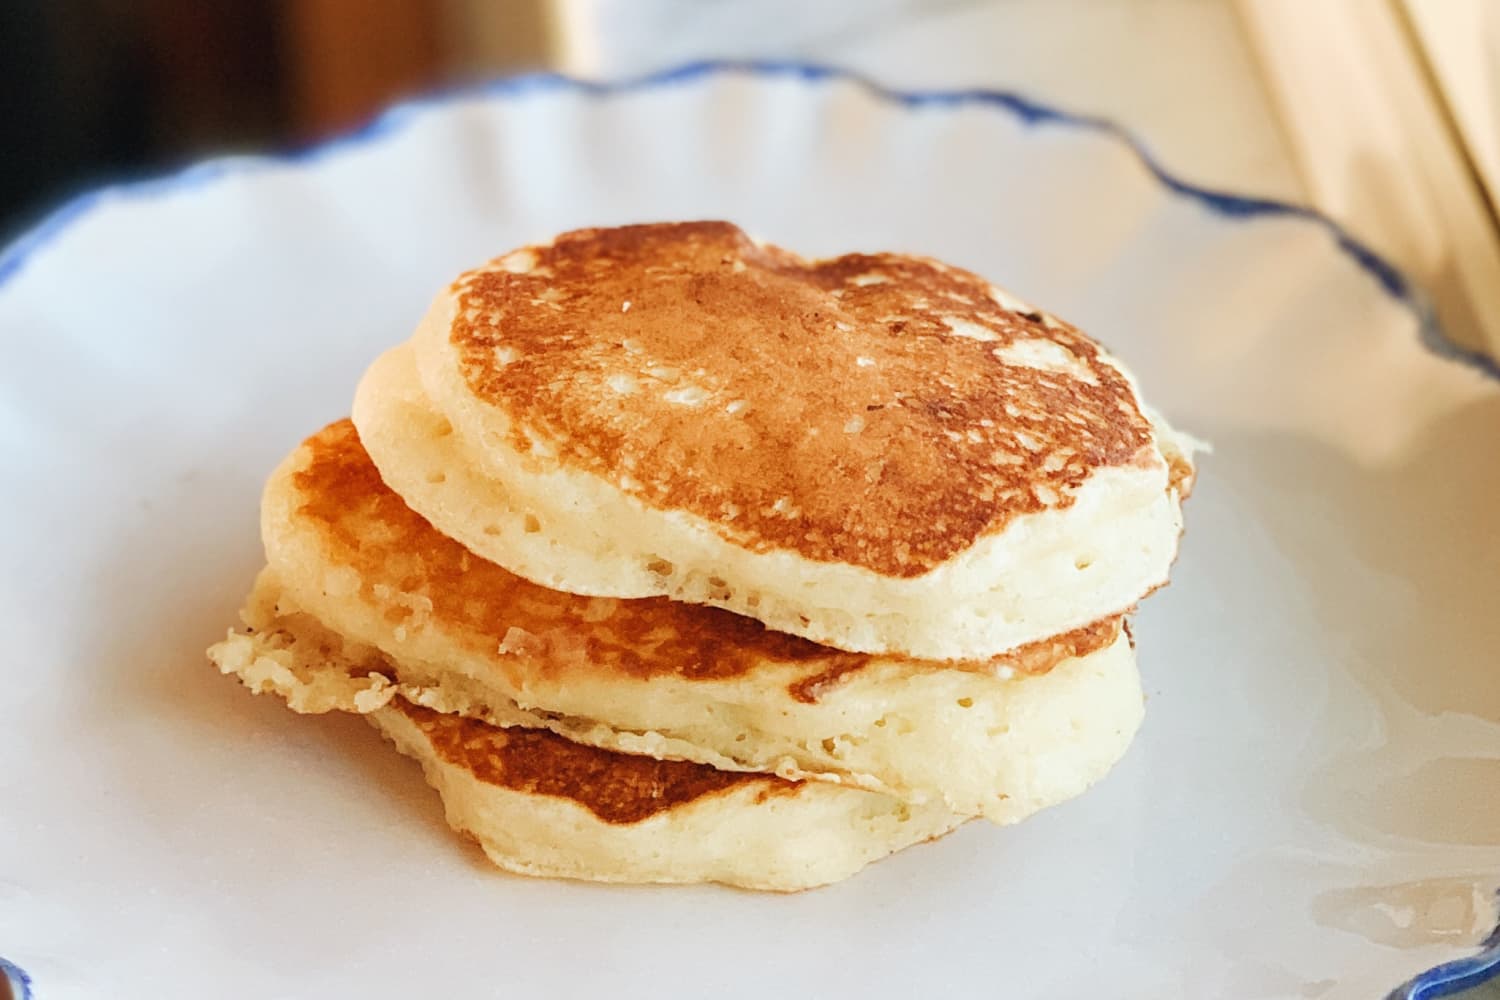 The Very Best Pancake Recipe I've Made for Years | Kitchn